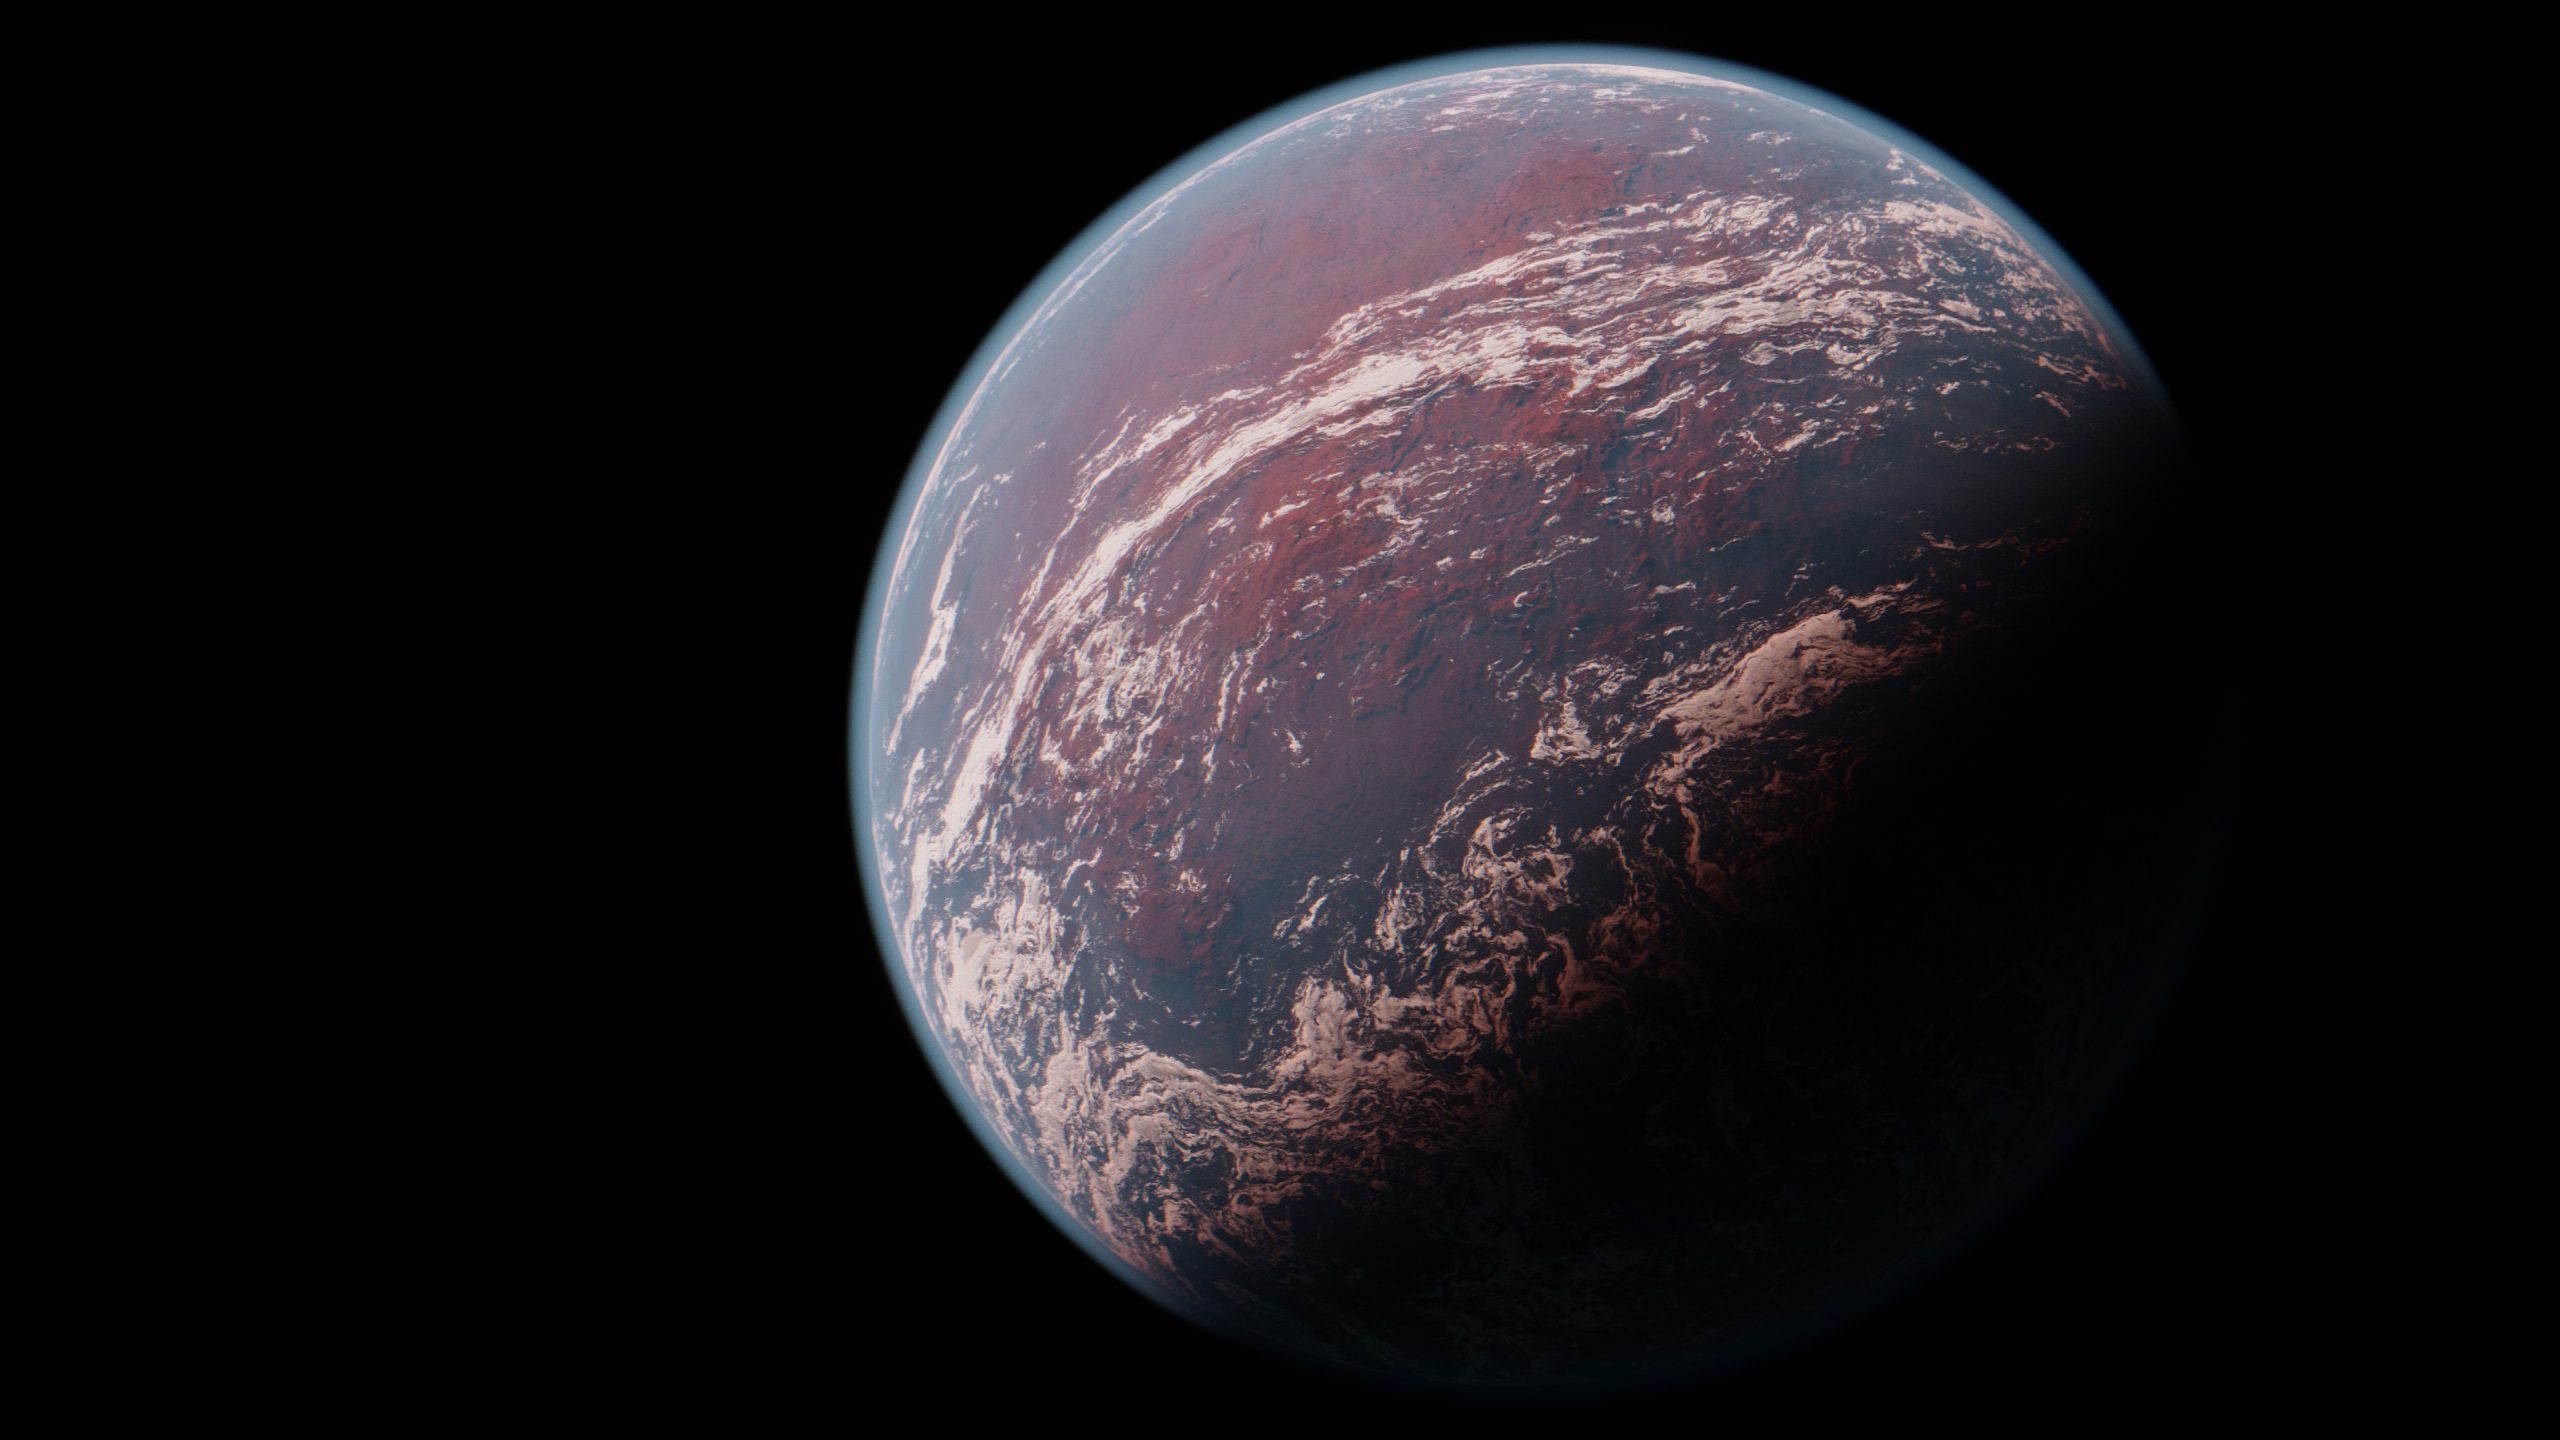 Procedurally Generated Planet
2019